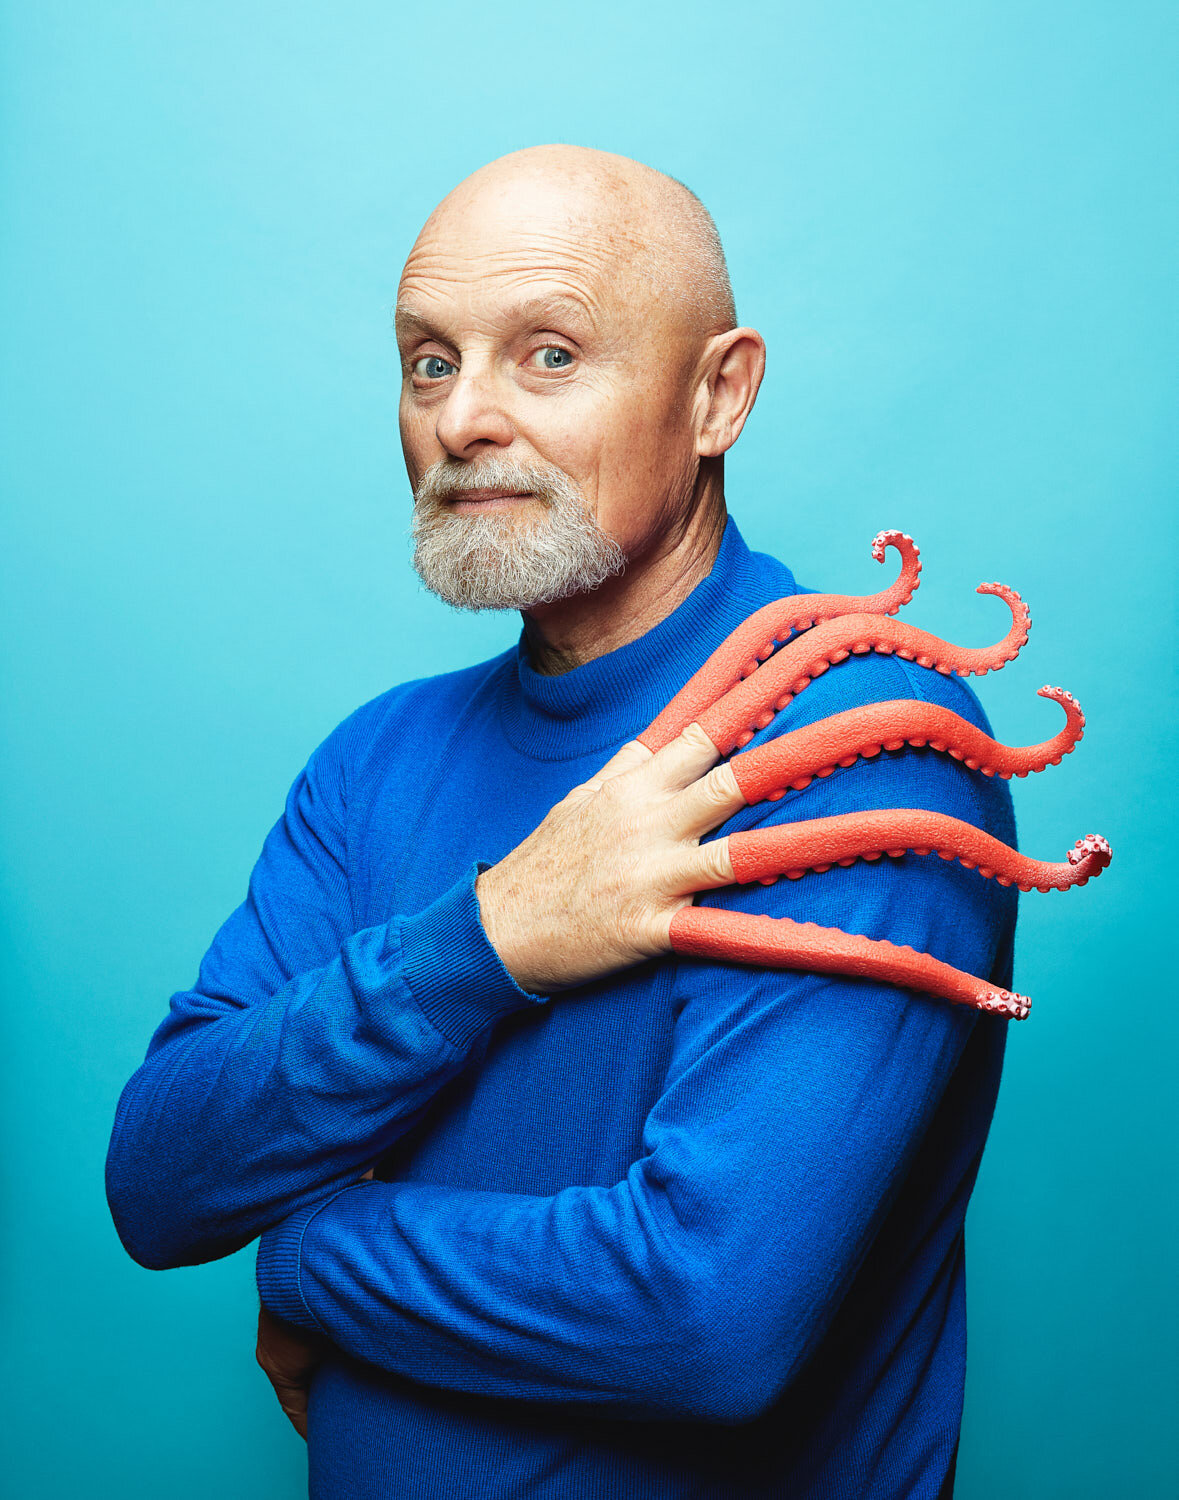 creative portrait of composer William Neil with octopus tentacles on his hand by creative portrait photographer Hanna Agar